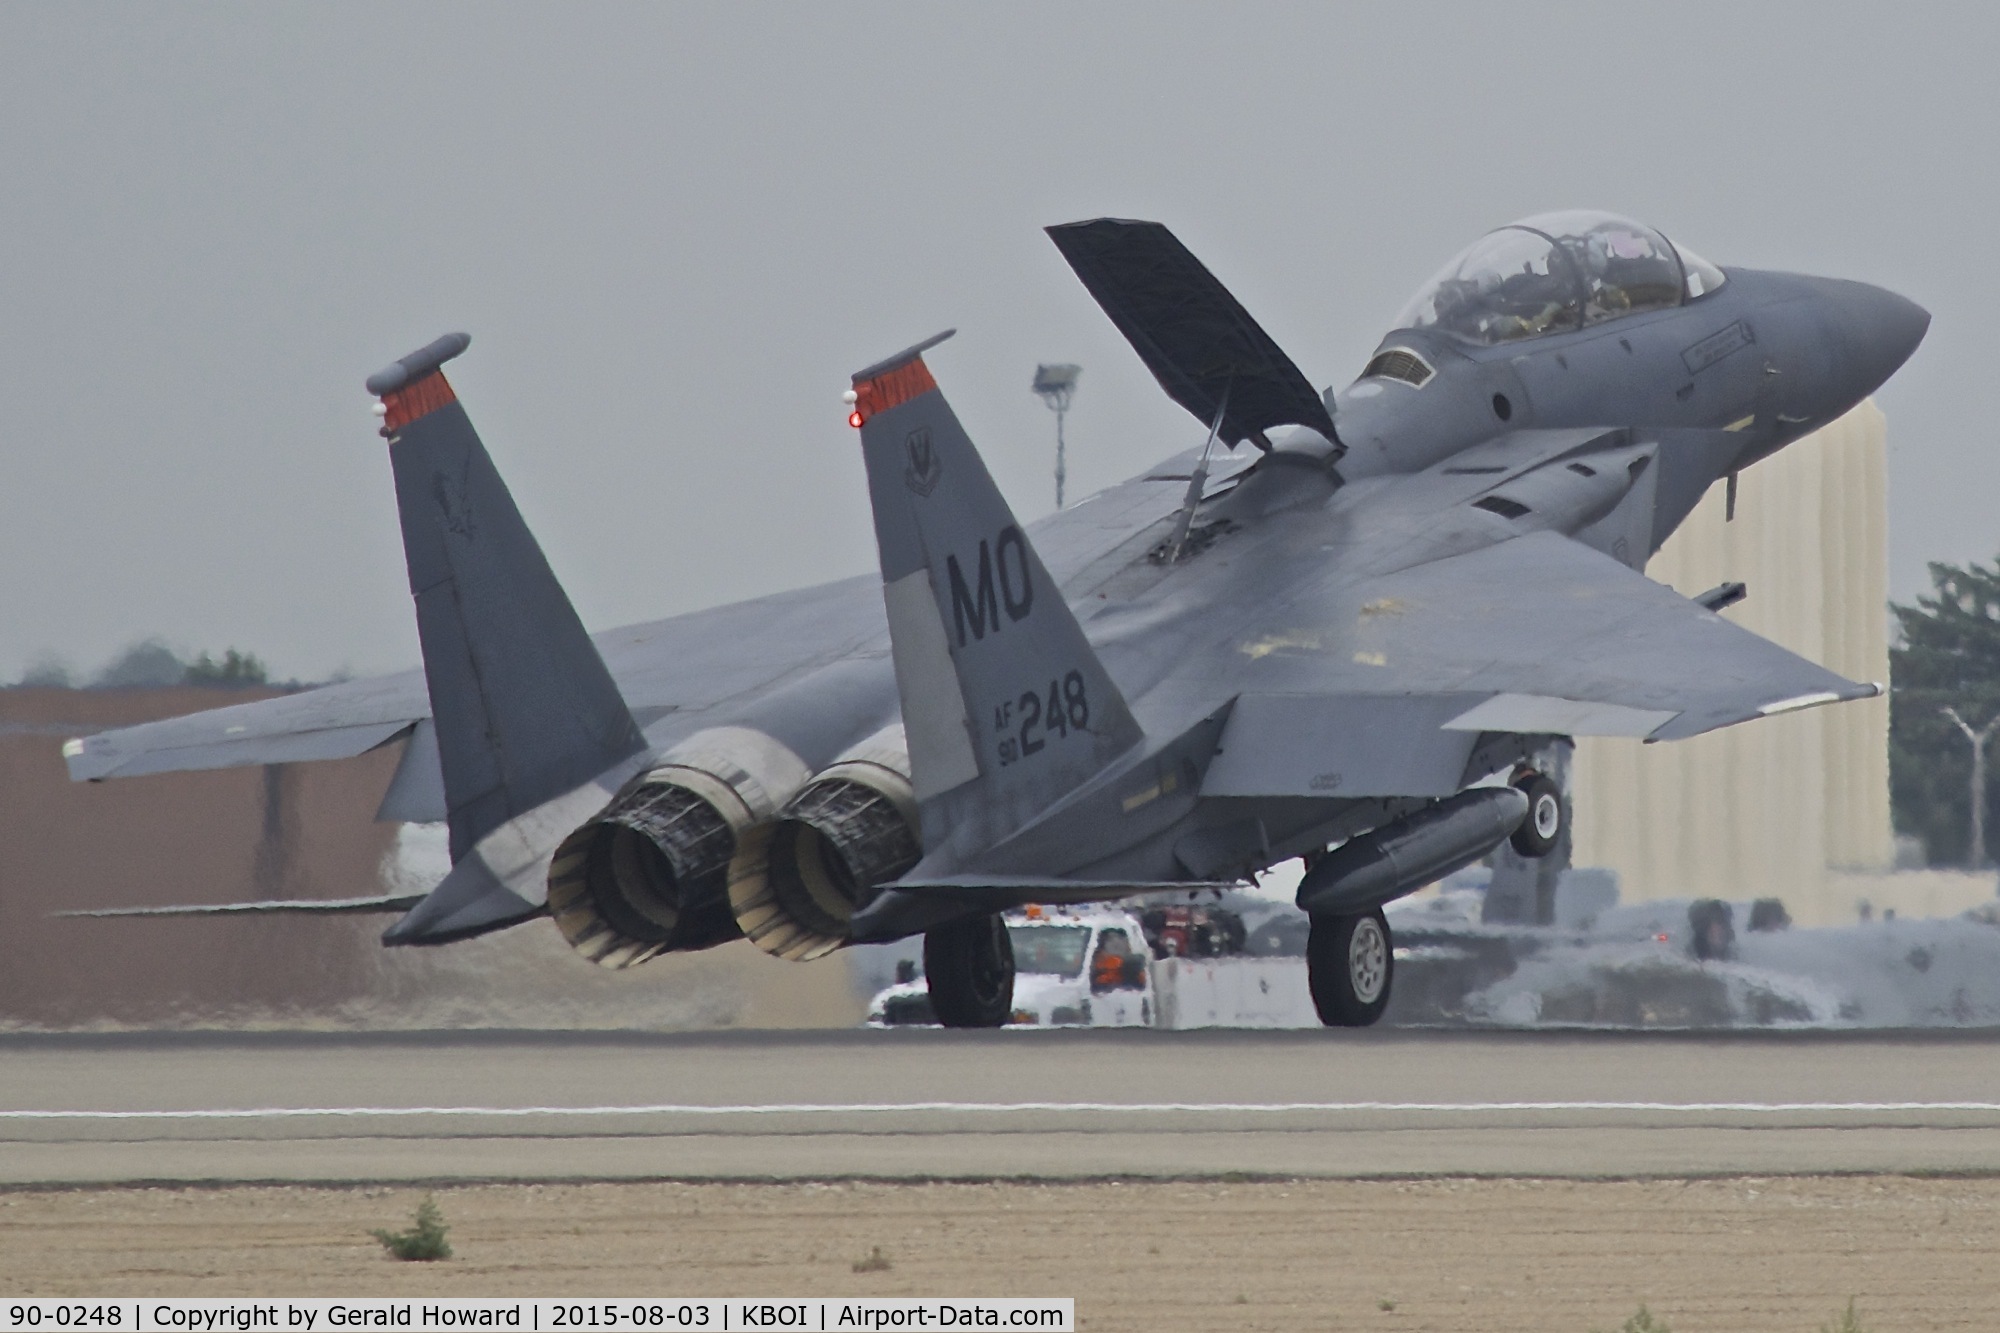 90-0248, 1990 McDonnell Douglas F-15E Strike Eagle C/N 1183/E150, Landing roll out on RWY 28R. 391st Fighter Sq., 